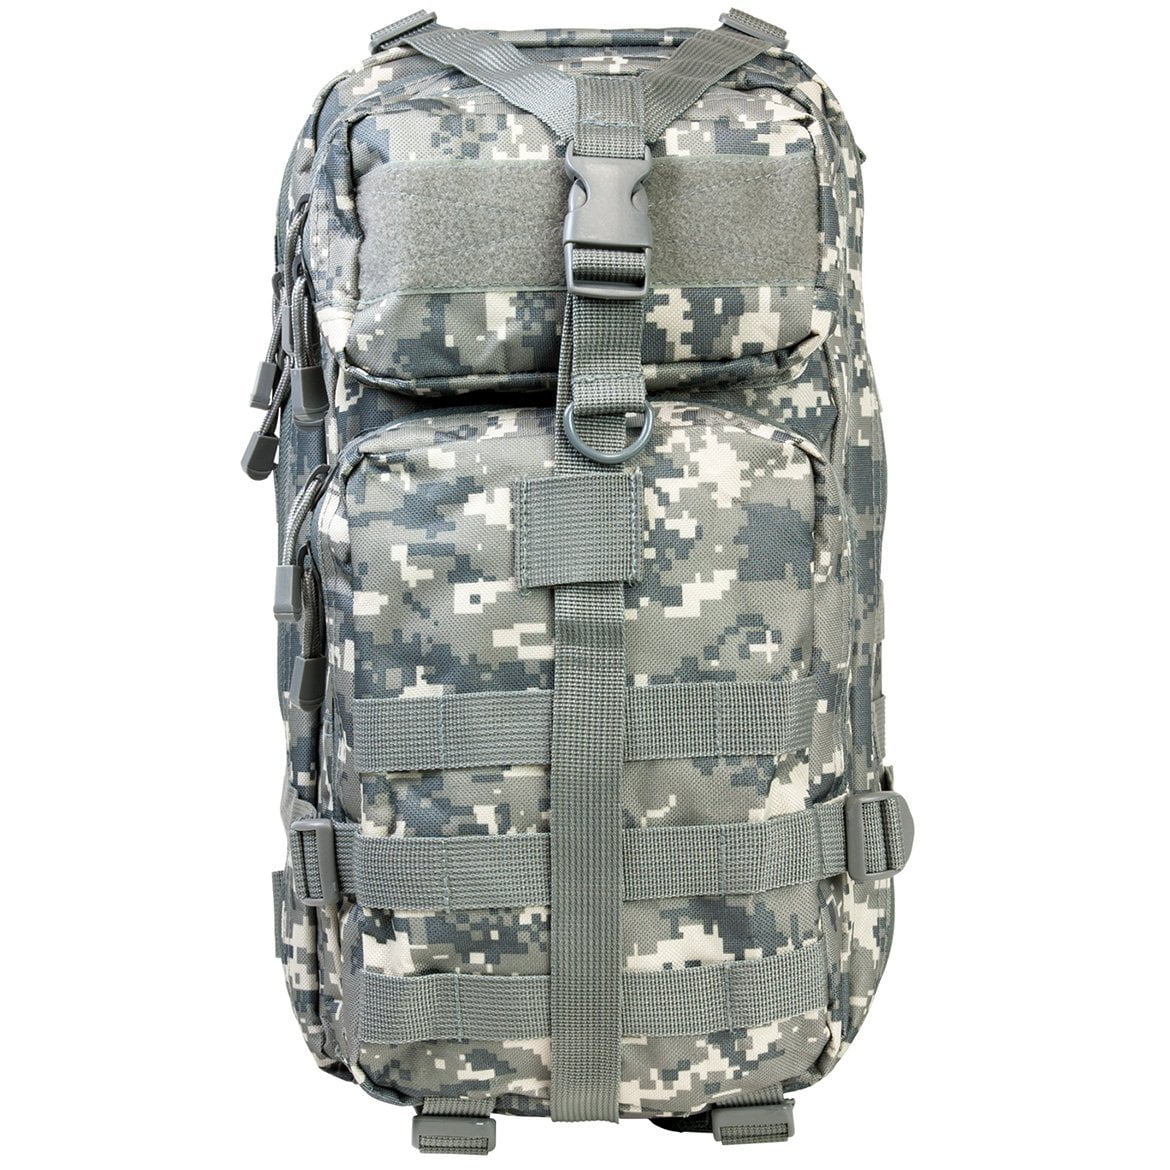 Camo Extreme Pak Camouflage Sling Pack Shoulder Bags 11in Hiking Backpacks 